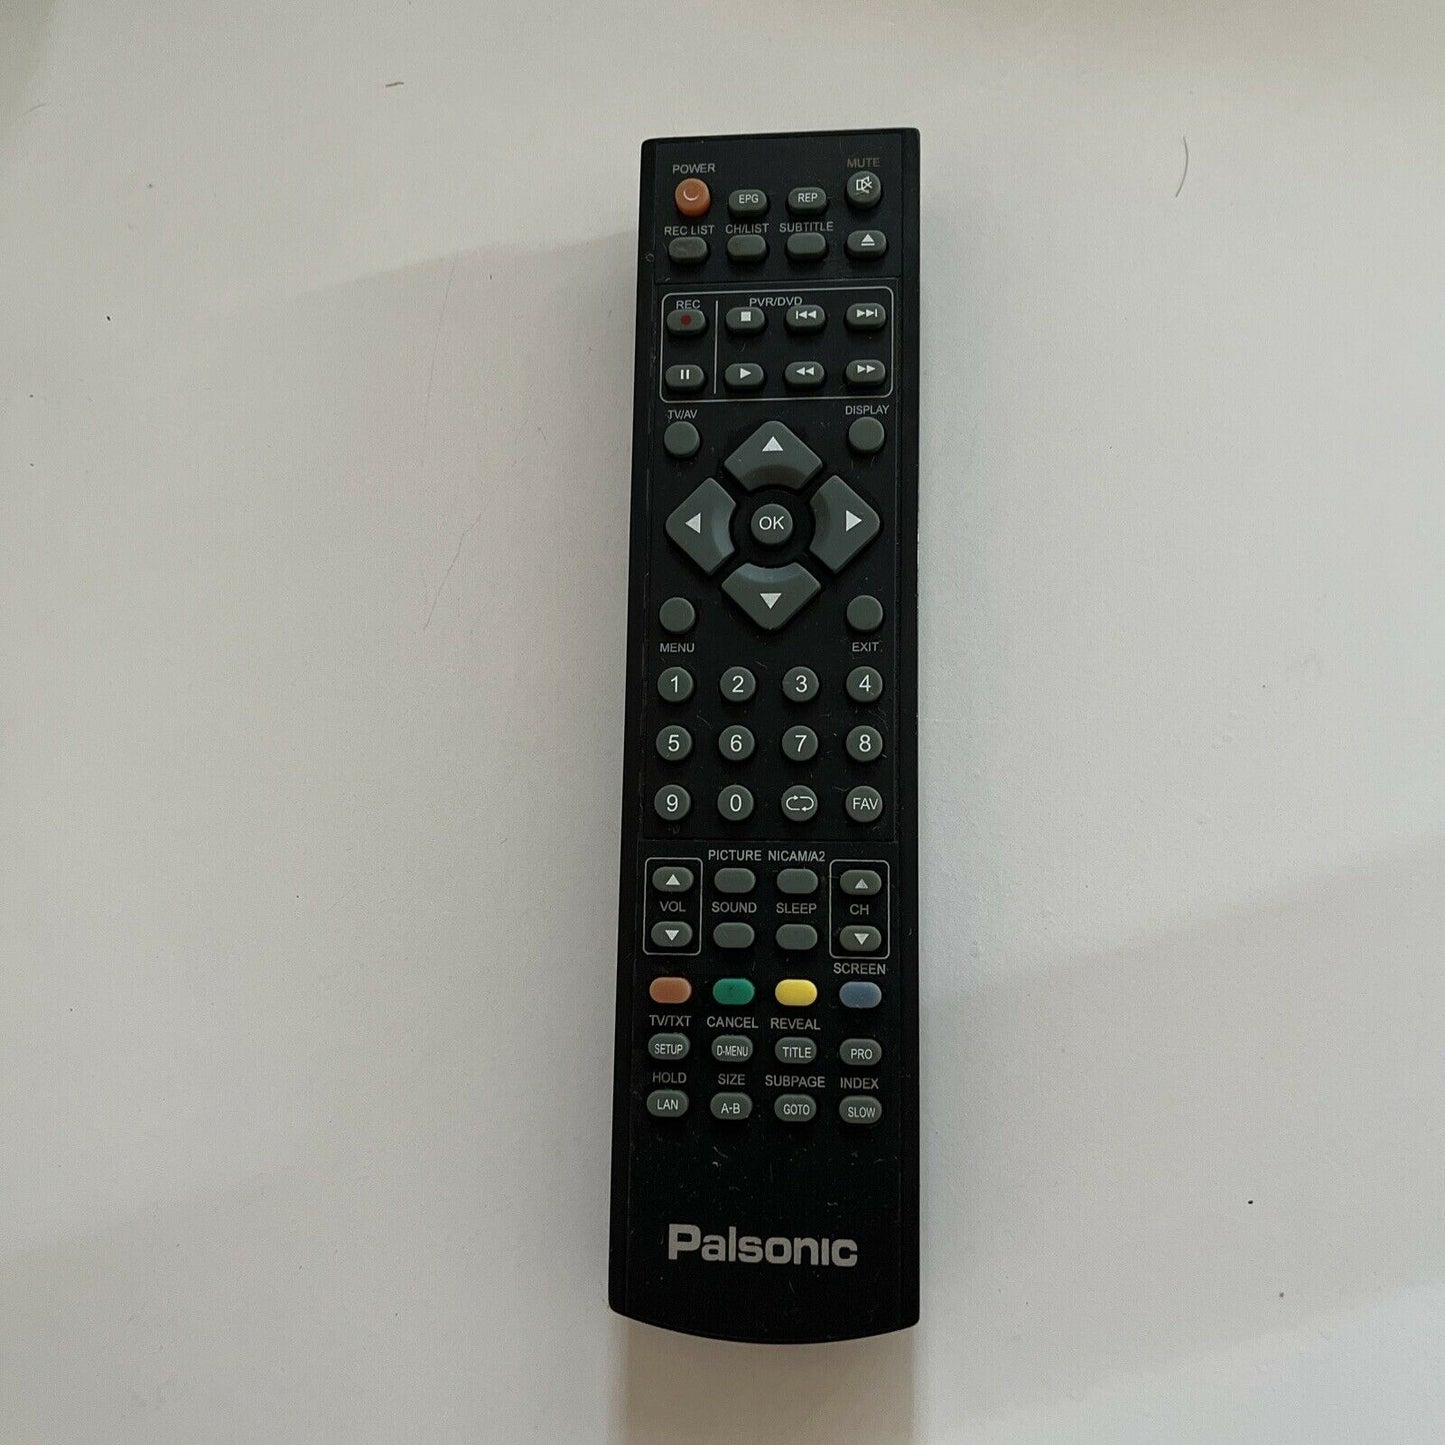 Genuine Palsonic Remote Control For TV *Missing Battery Lid*